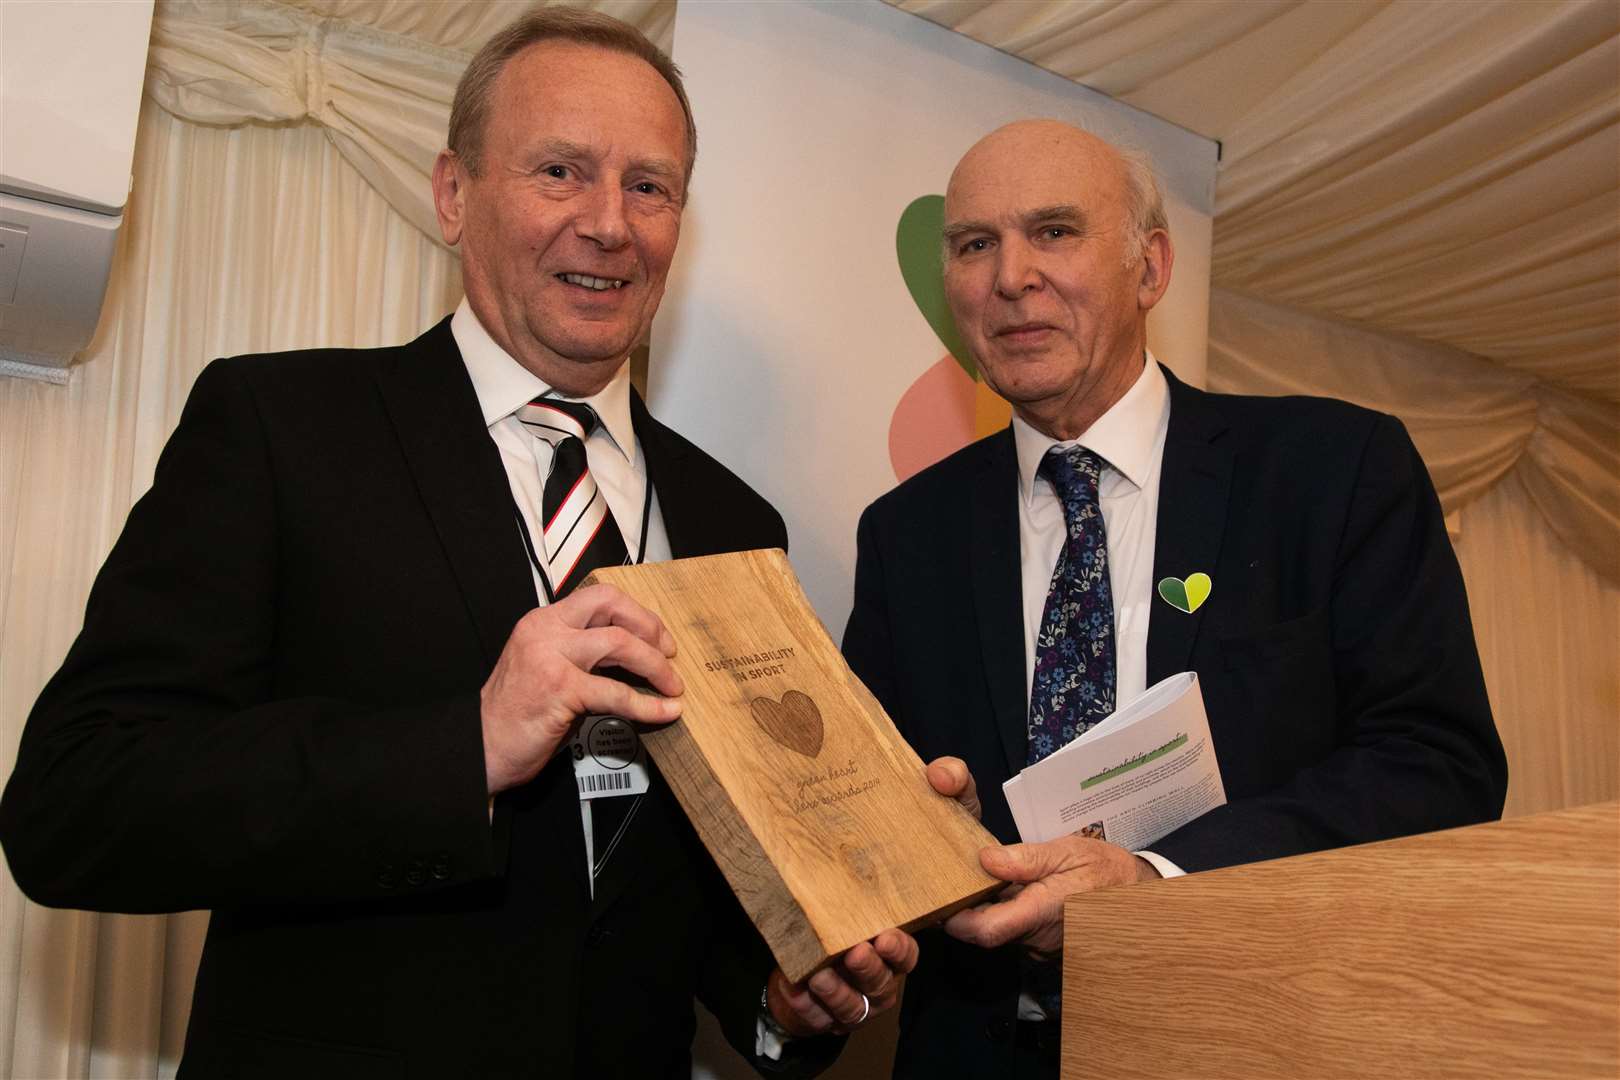 Dartford FC's Norman Grimes with Liberal Democrats leader Vince Cable. Picture: The Climate Coalition